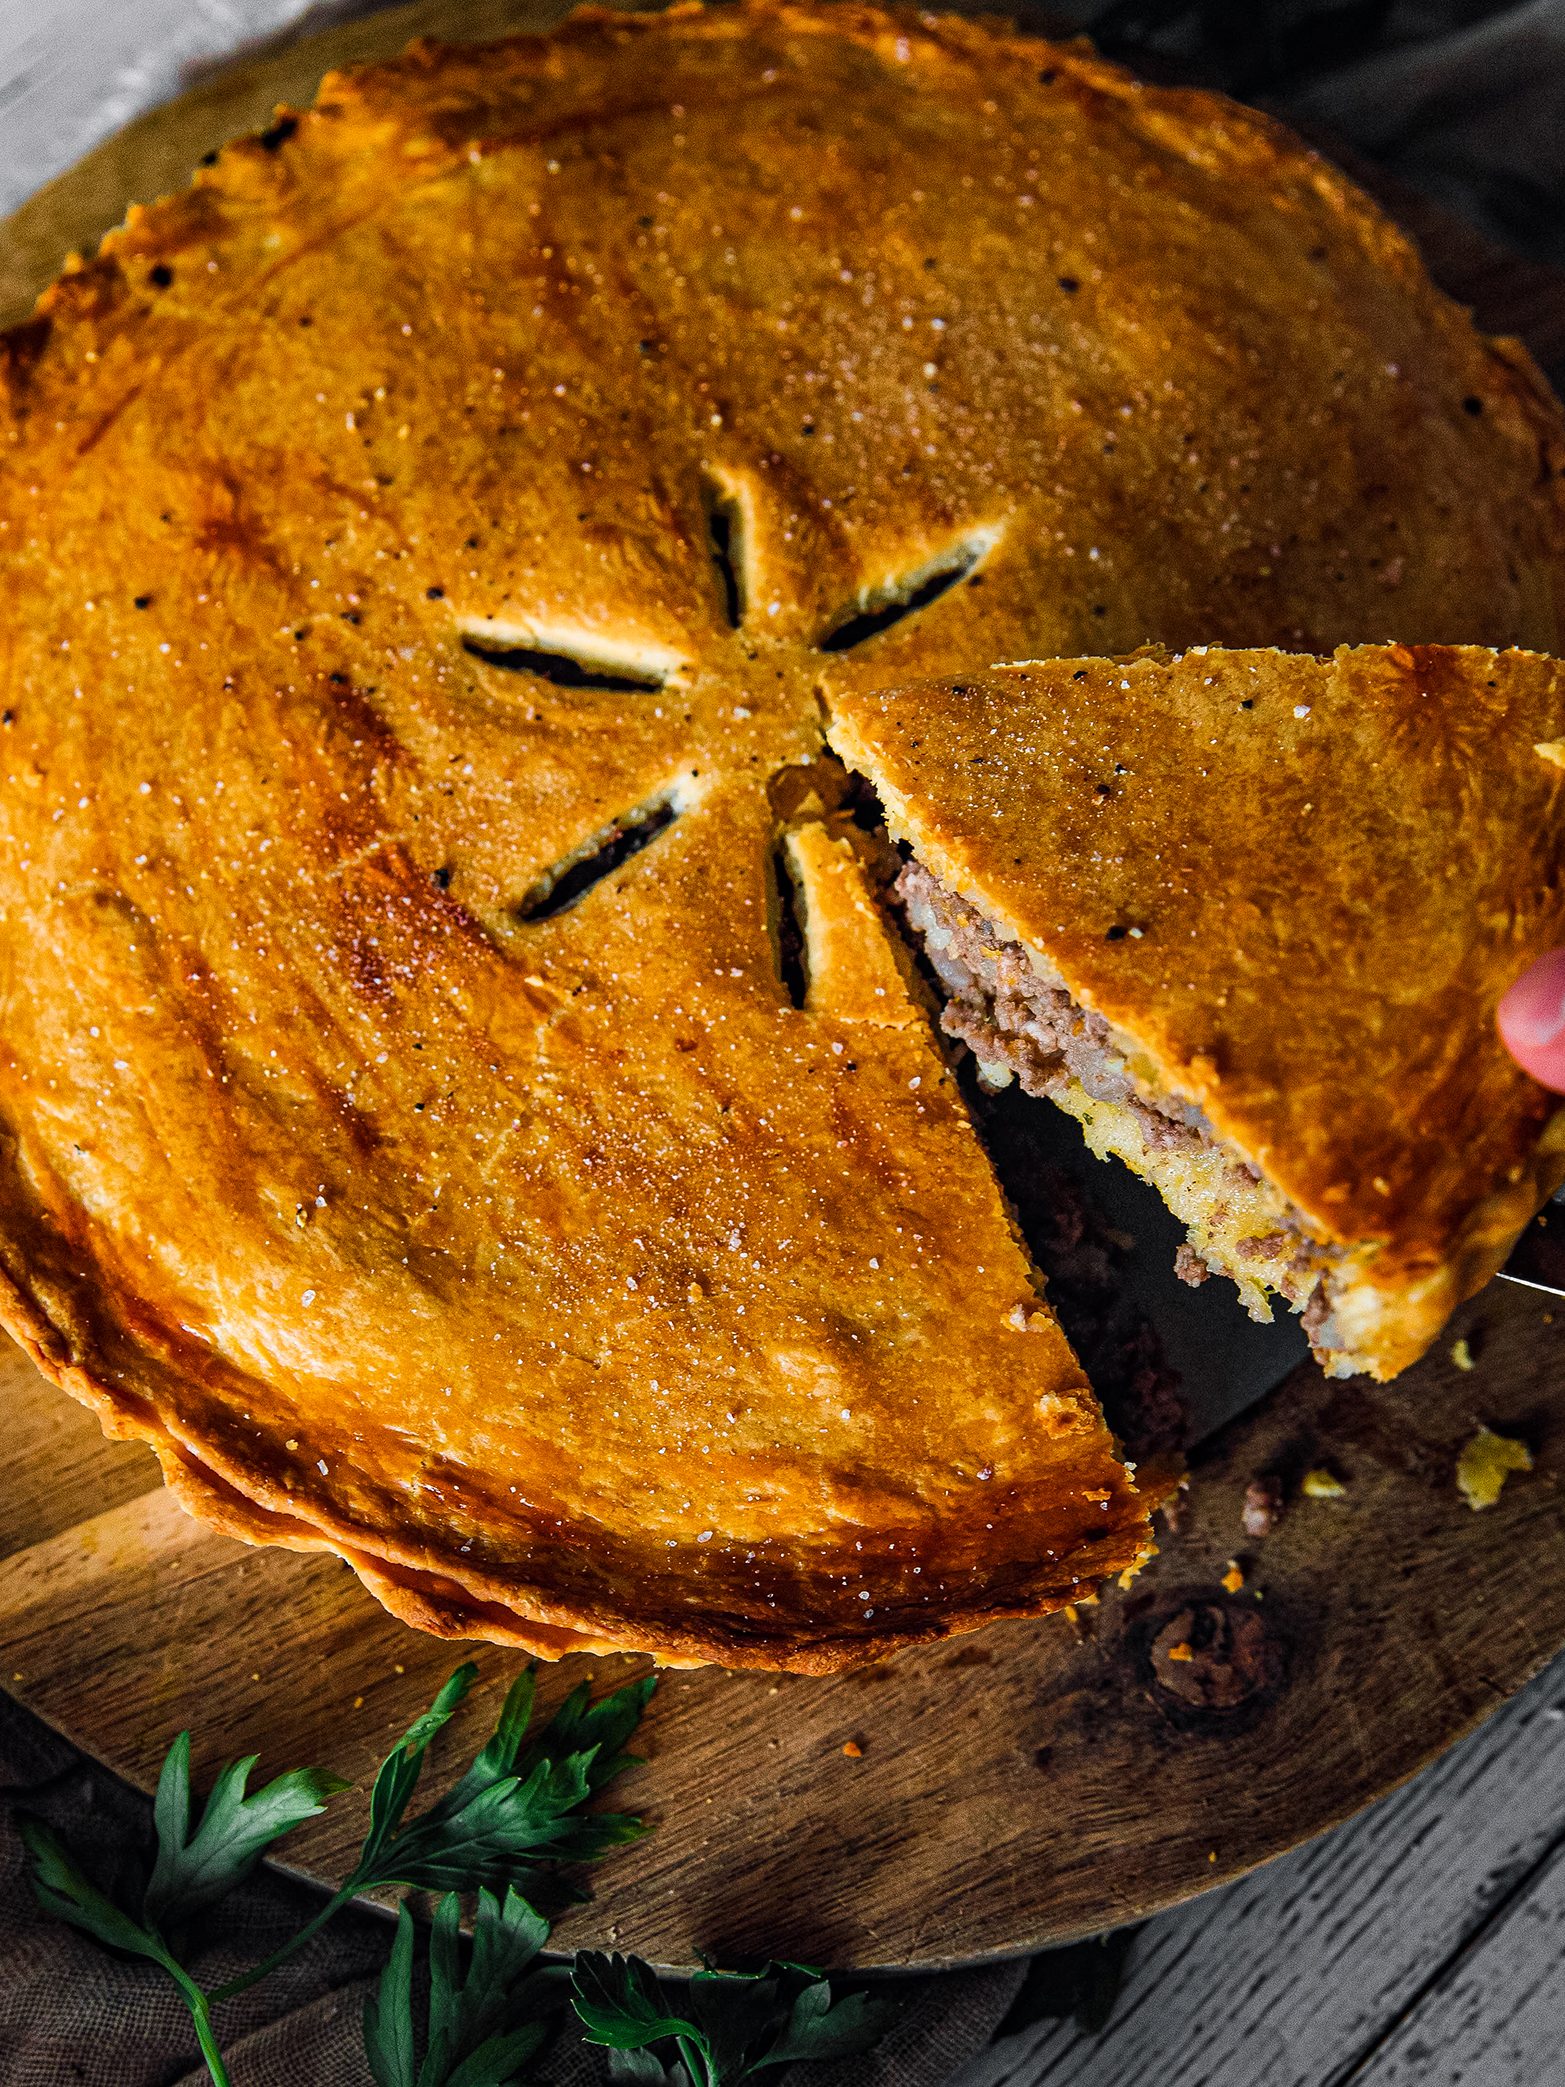 French Meat Pie